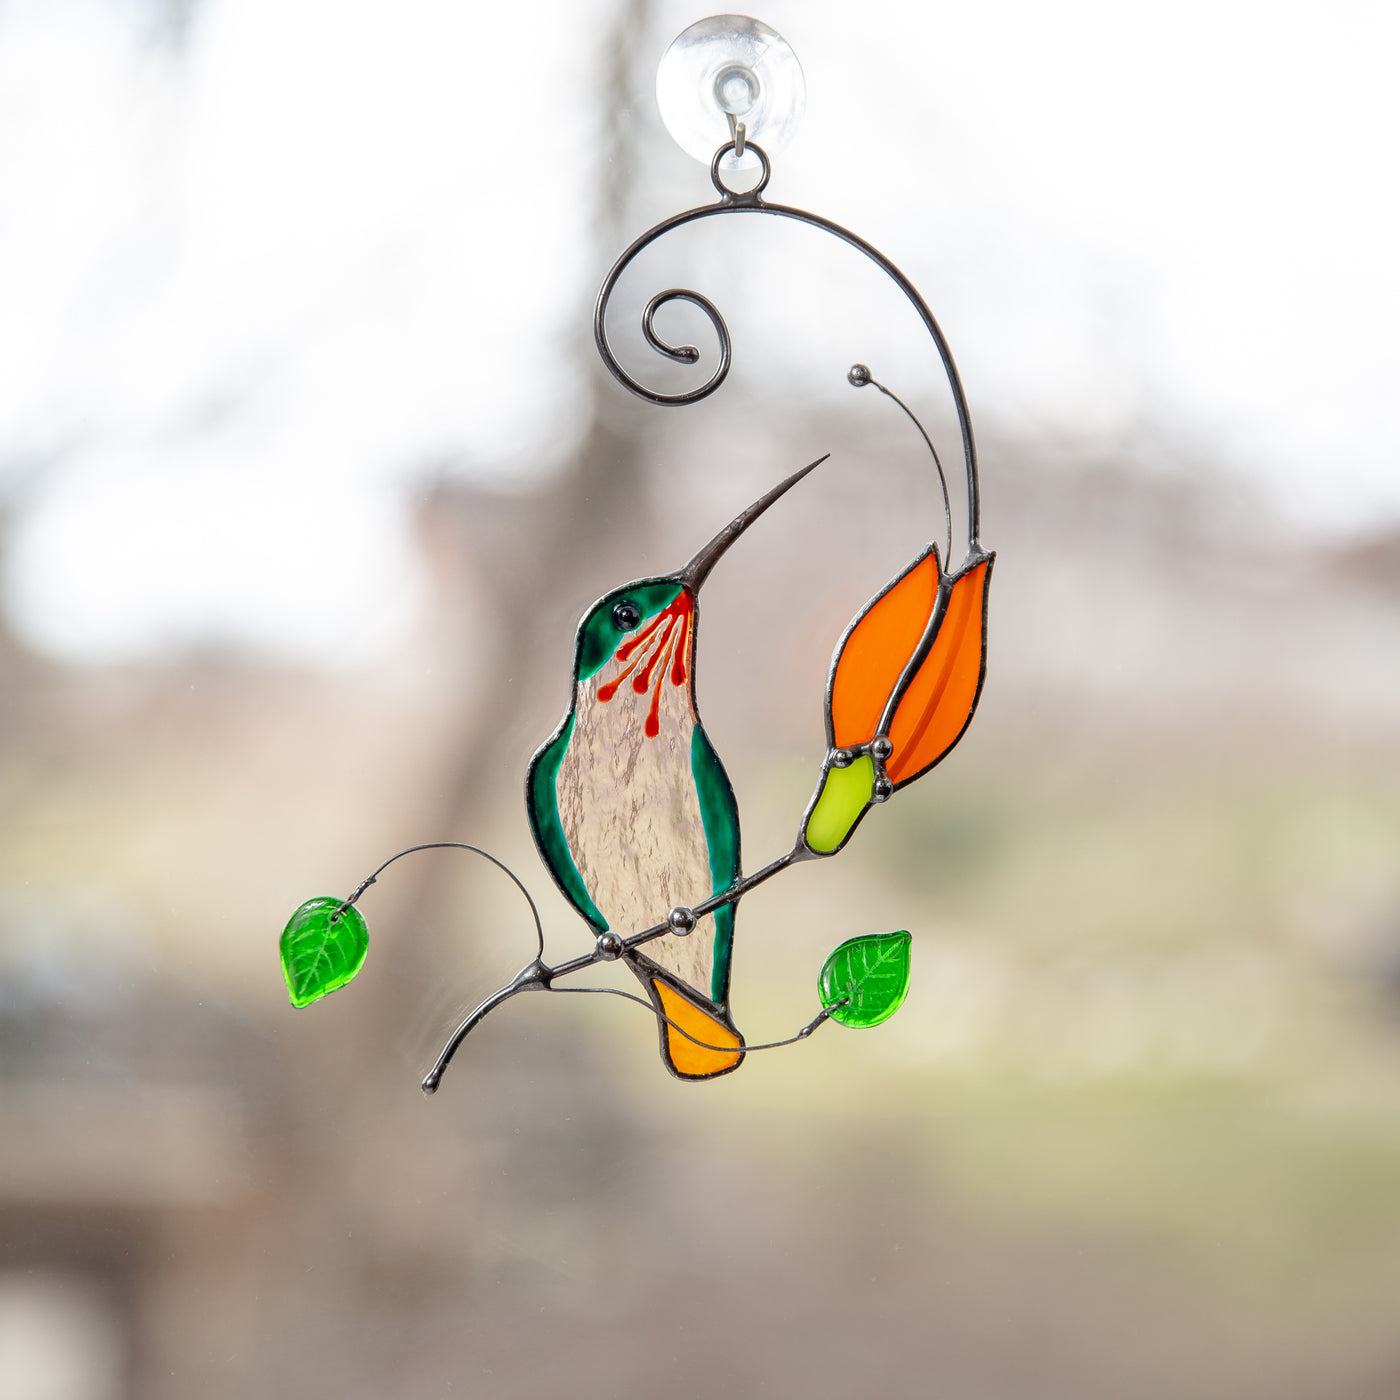 Suncatcher of a stained glass hummingbird on the branch with orange flower